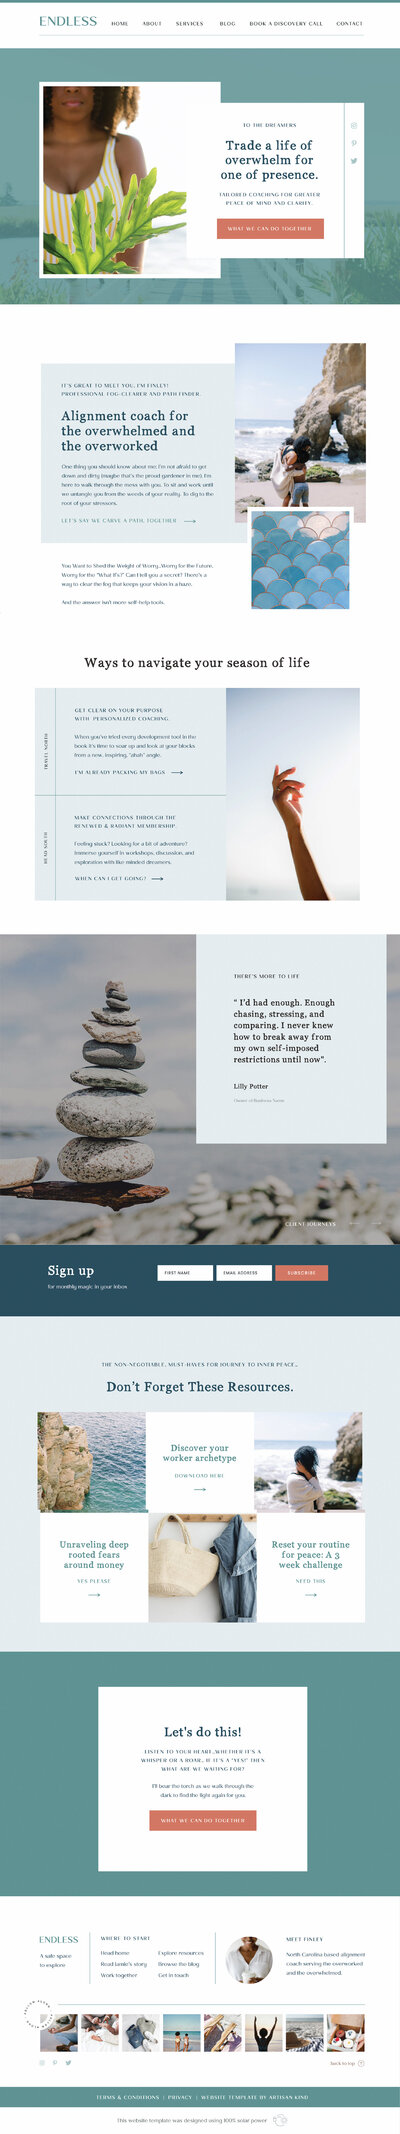 Artisan Kind Showit website template customized with a turquoise and  coral